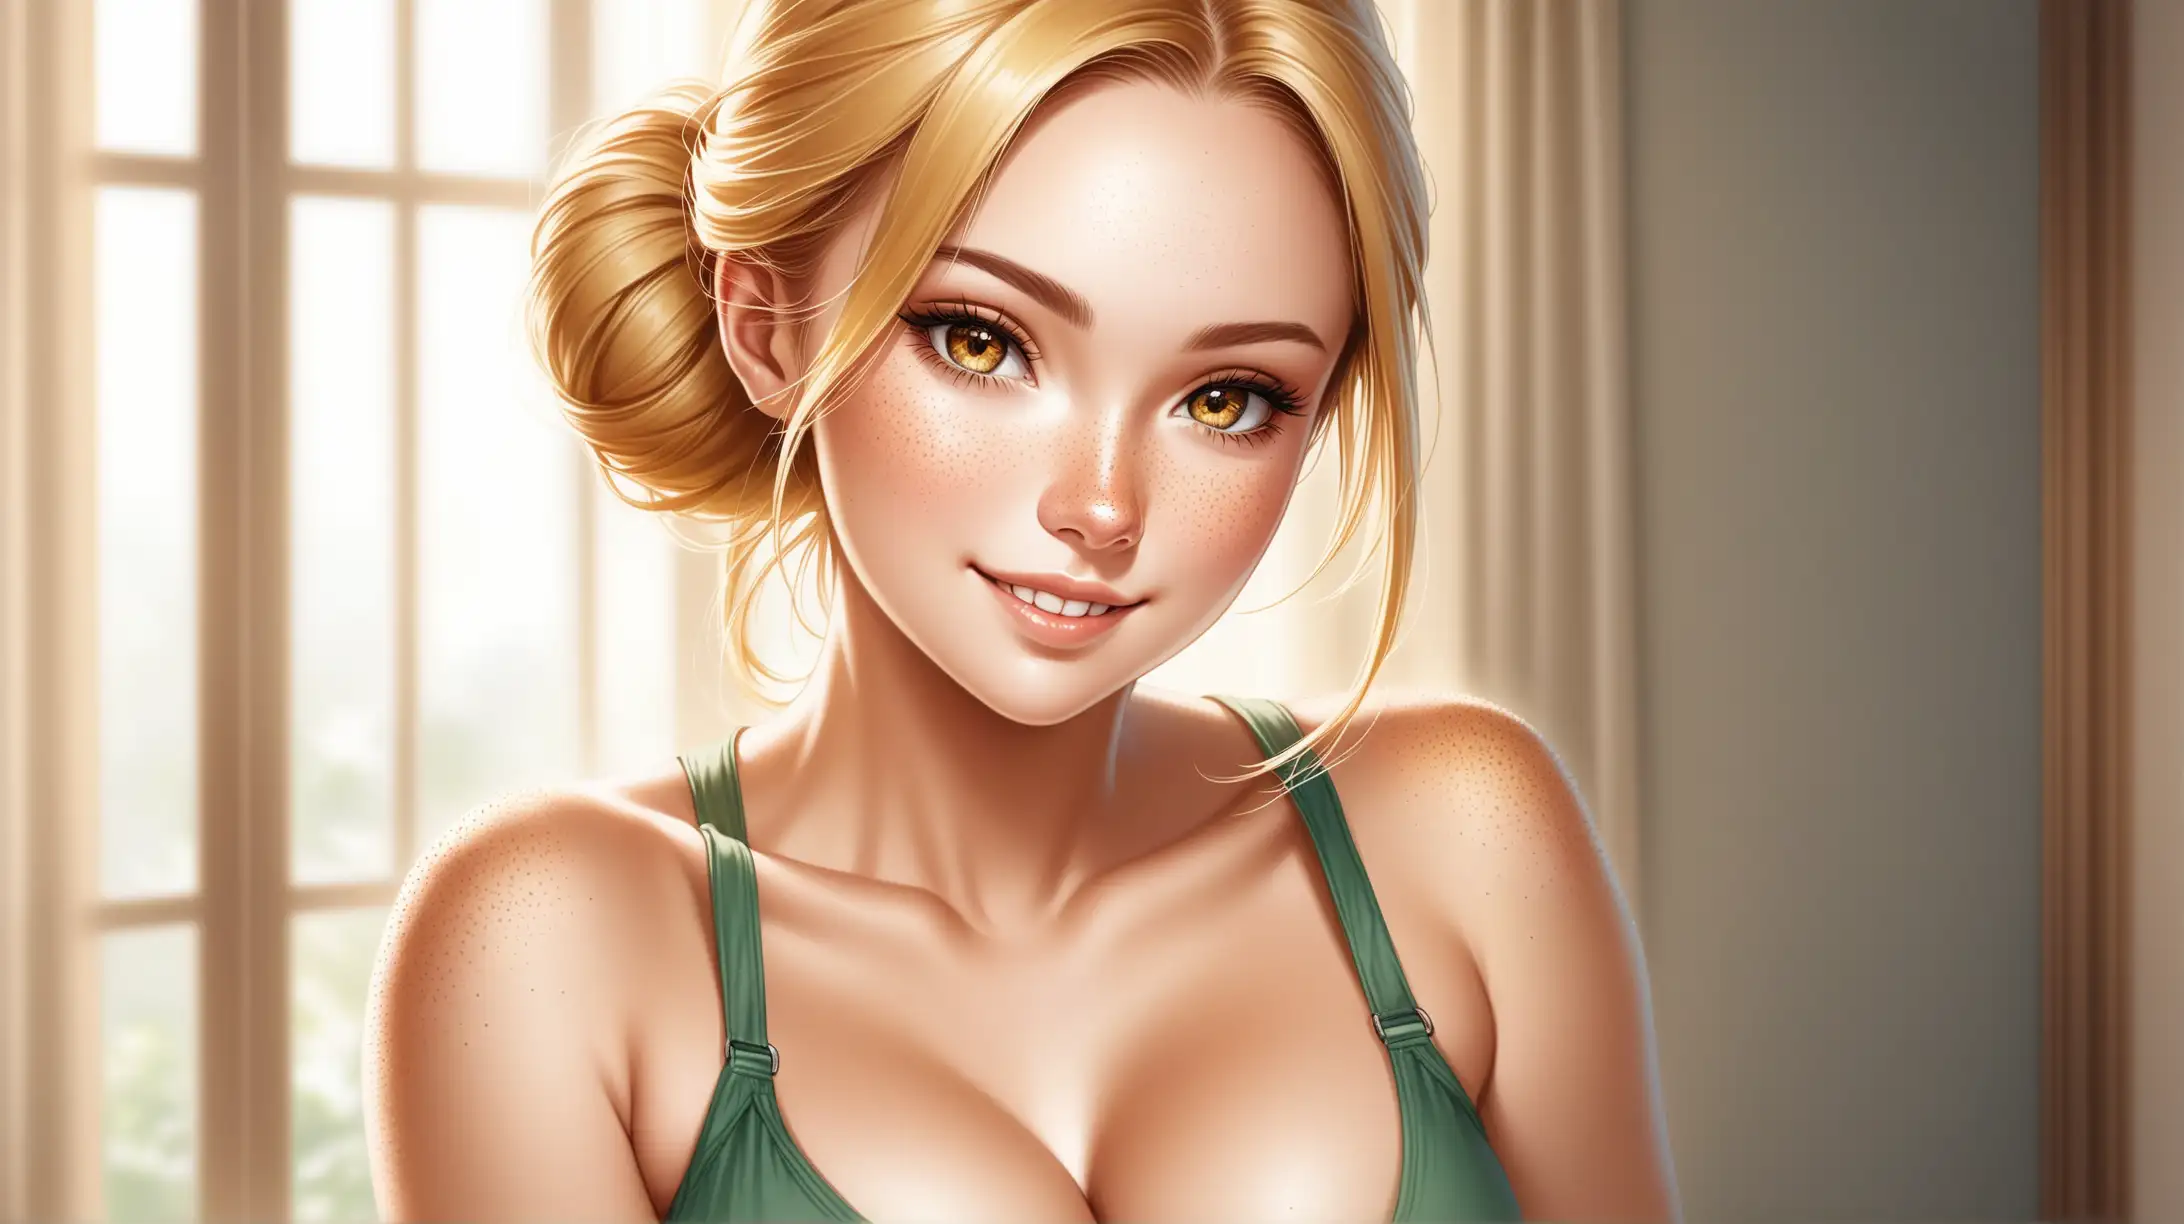 Draw a woman, long blonde hair in a bun, gold eyes, freckles, perky body, high quality, realistic, upper body shot, indoors, natural lighting, casual outfit, seductive pose, cleavage, smiling toward the viewer